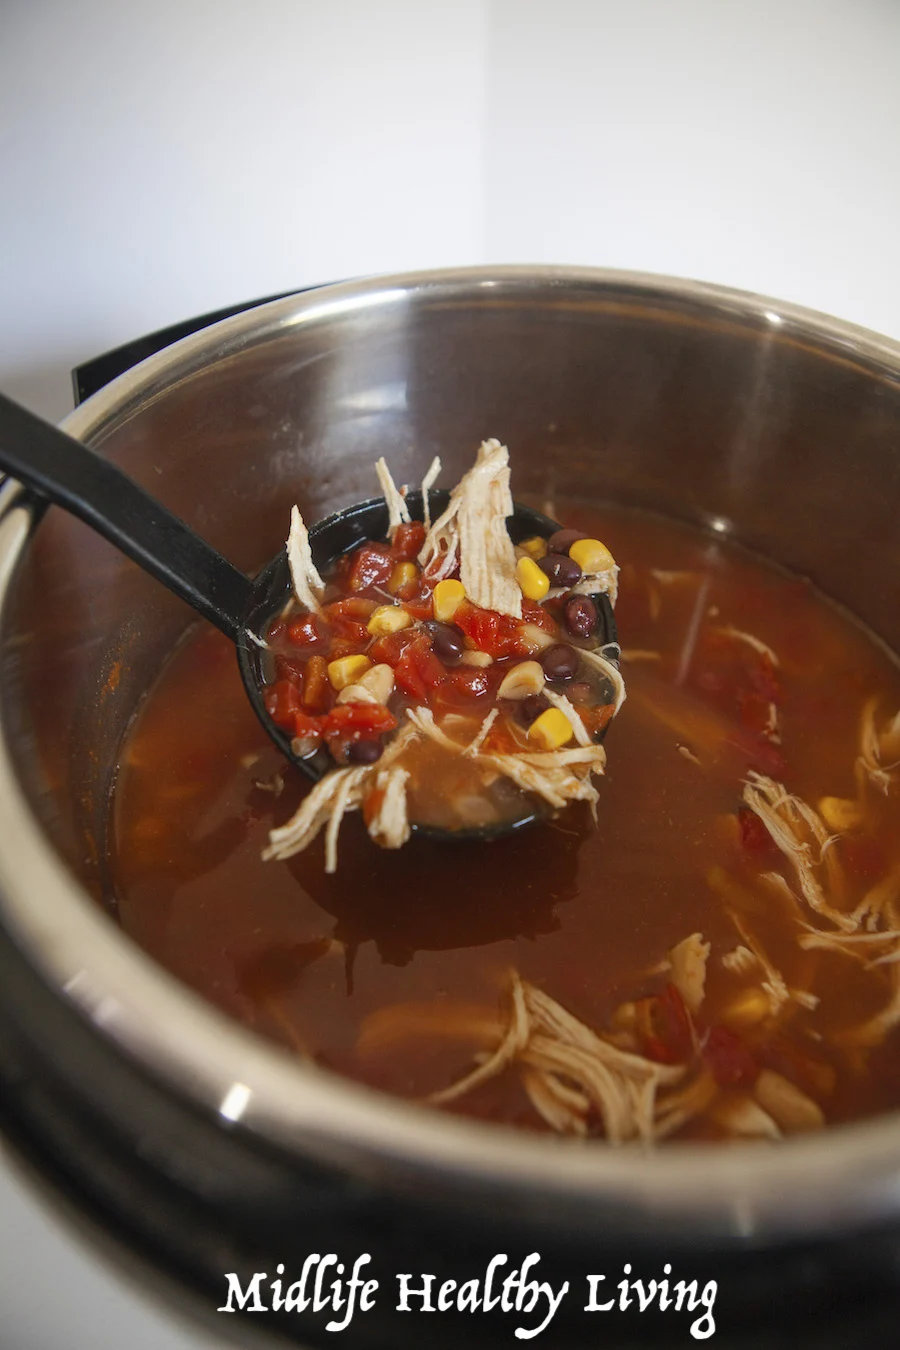 A scoop of the finished Weight Watchers chicken chili ready to be served and eaten. 